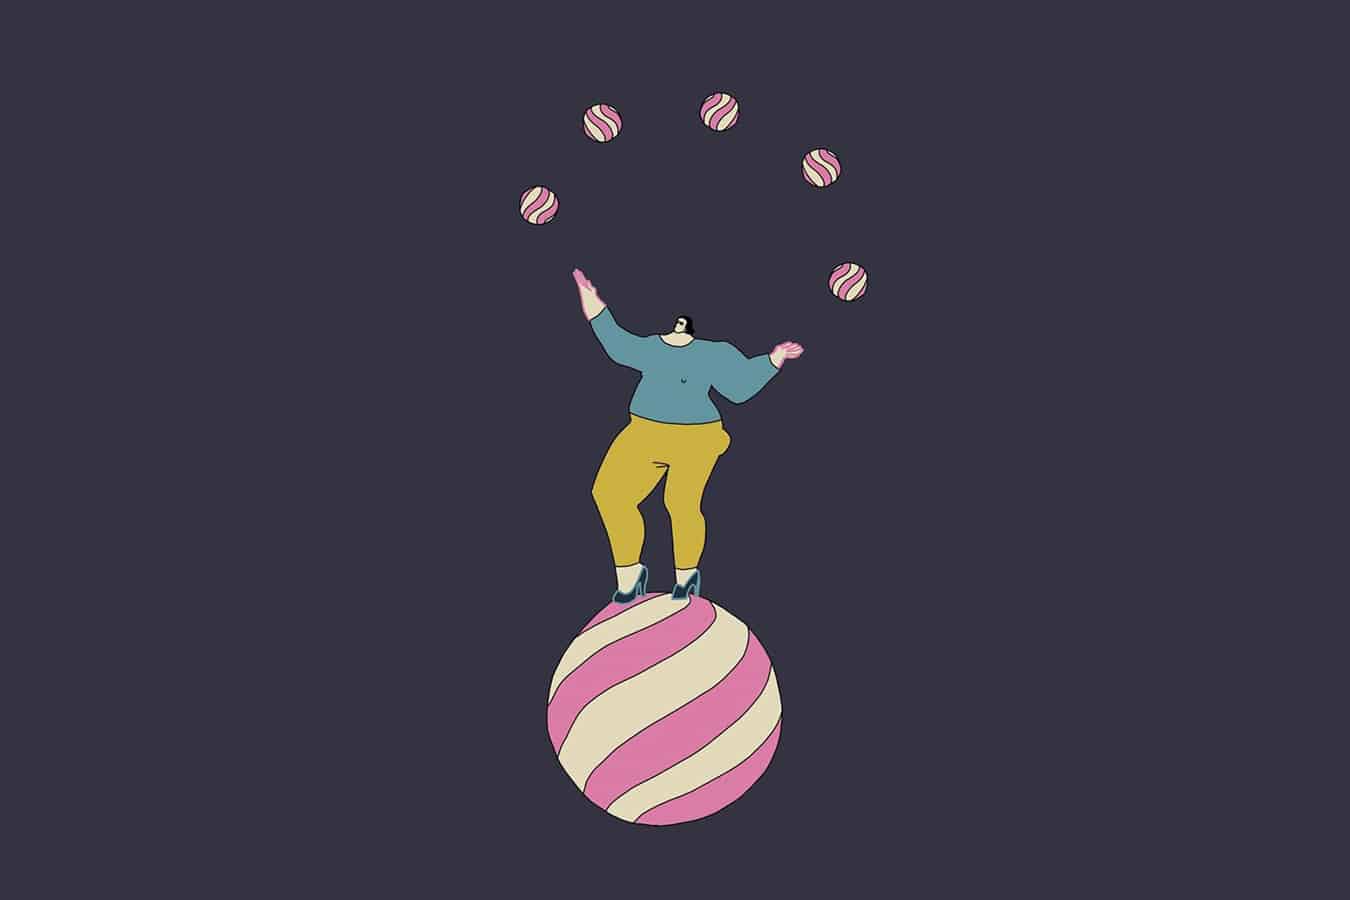 Illustrated person throwing ring of spheres.